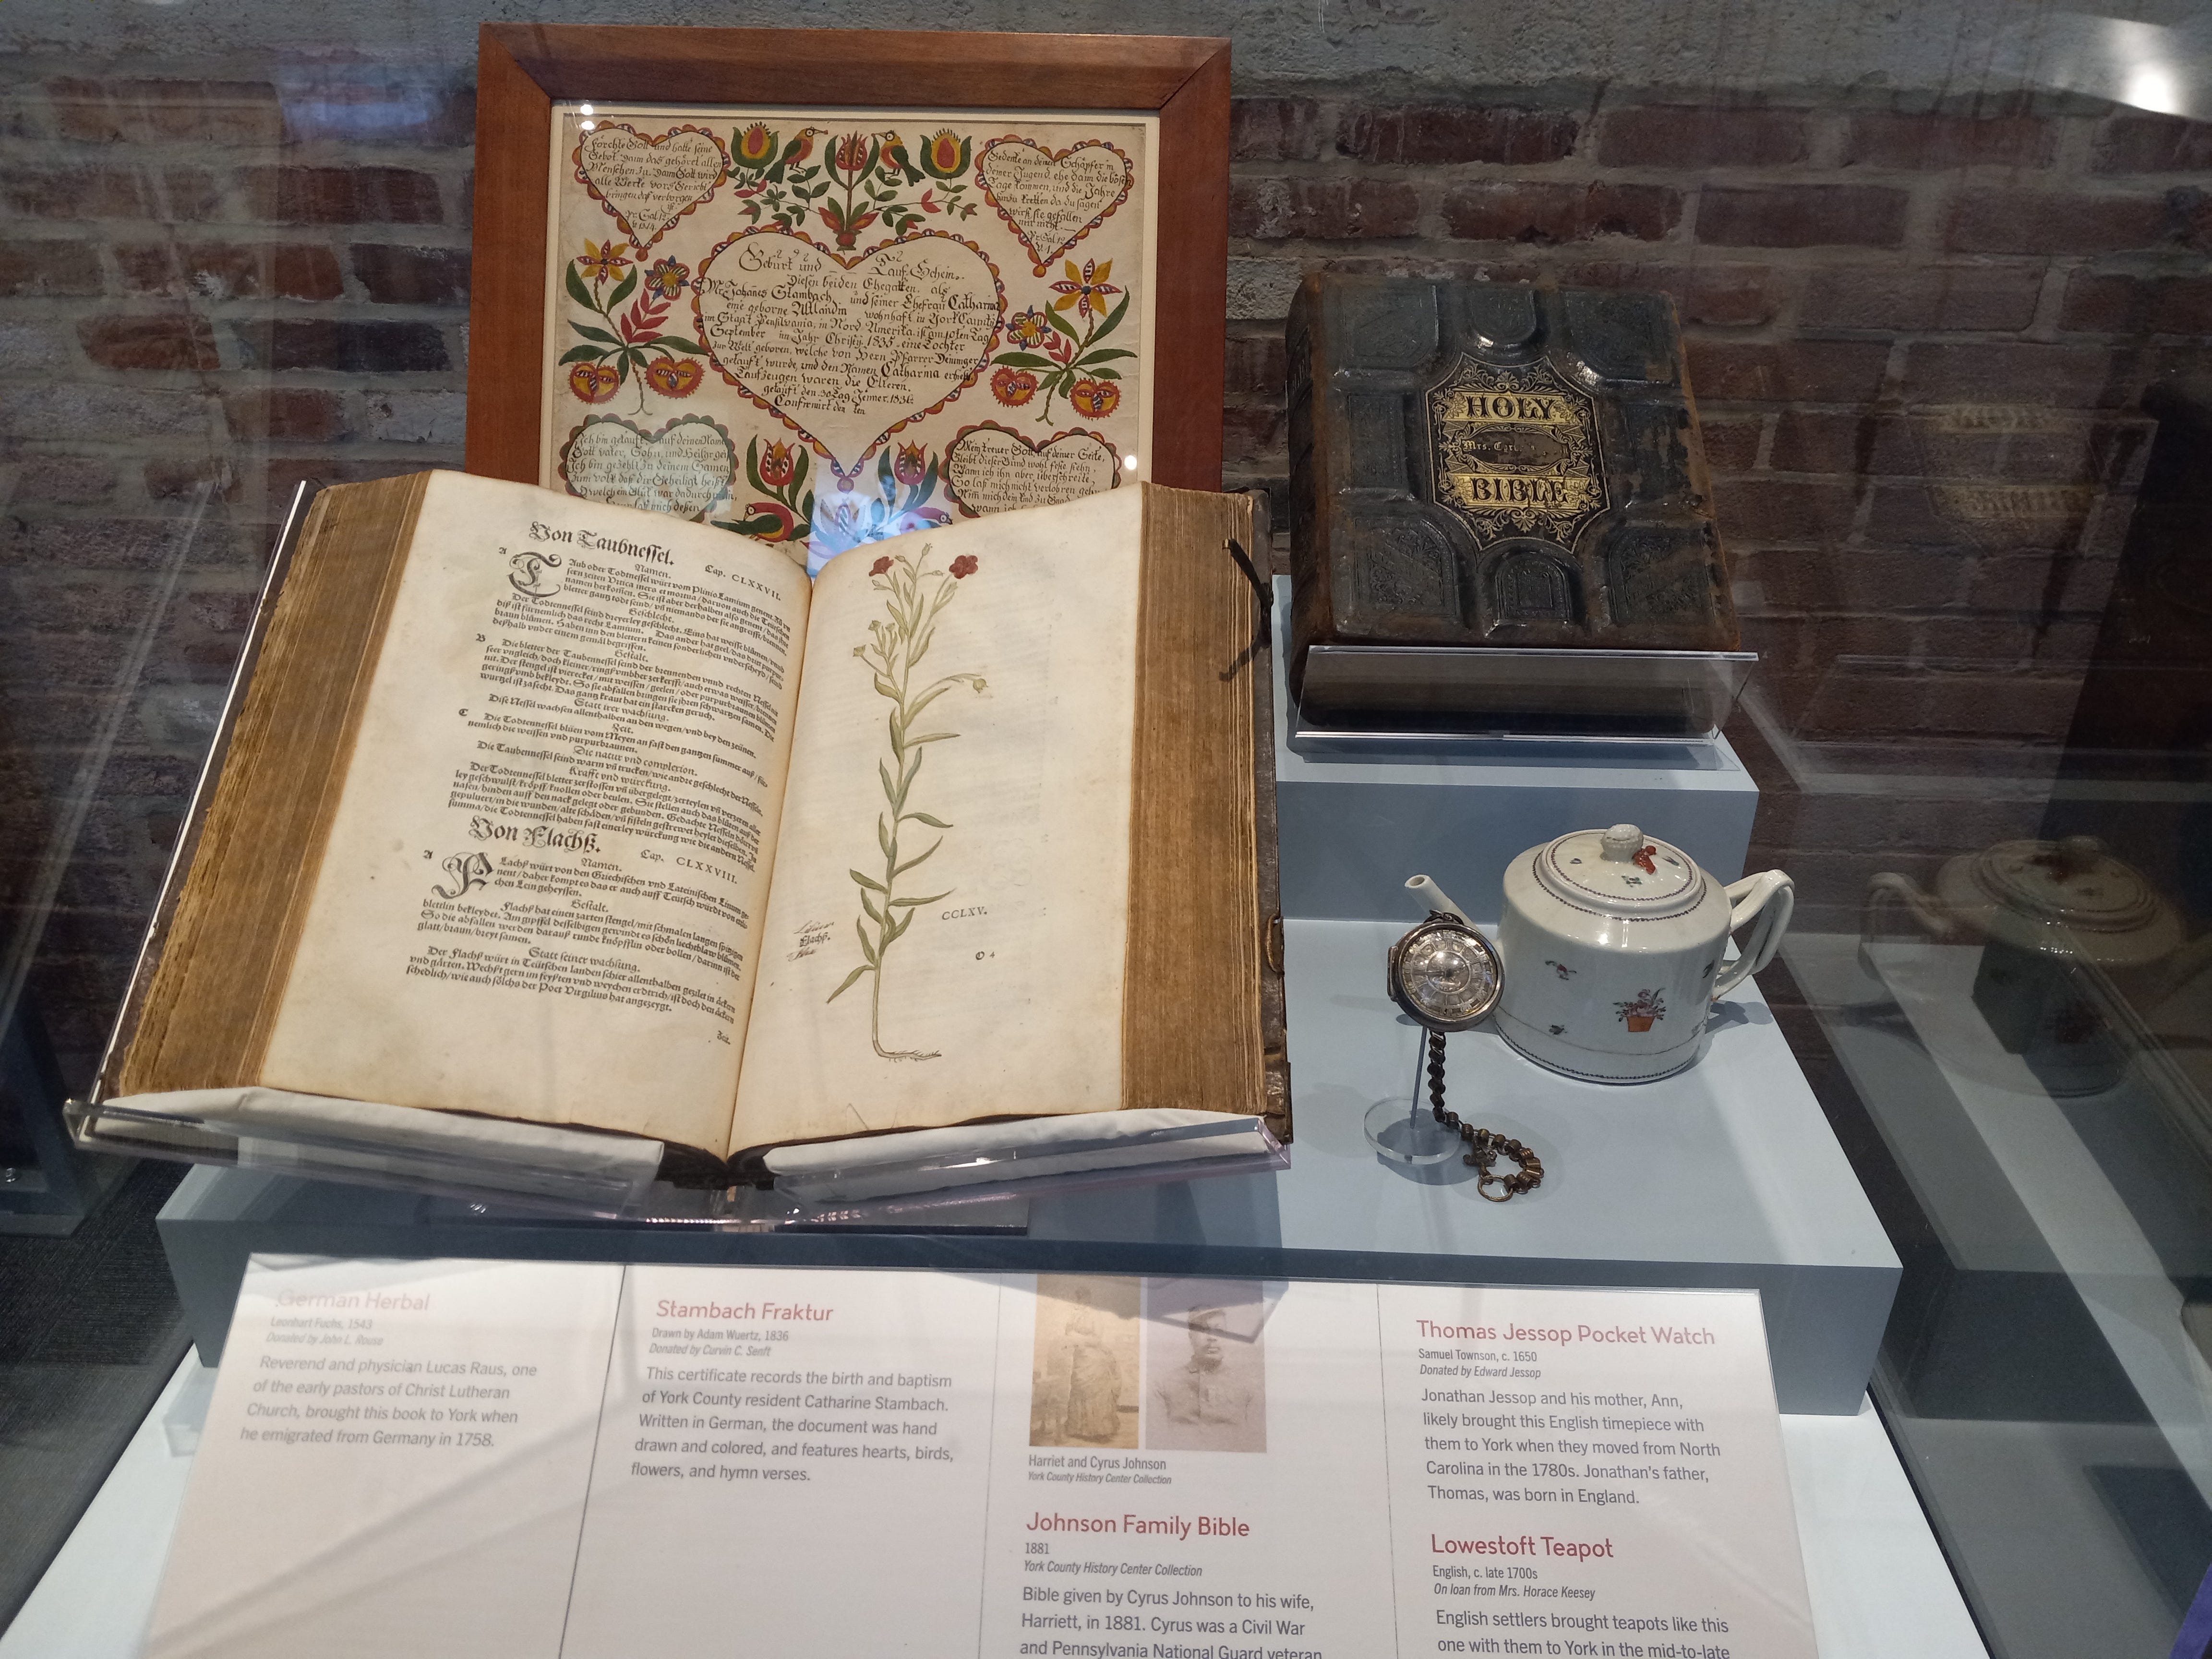 A book on herbs printed in the 1500s is one of the oldest pieces to make the move to the new York County History Center.